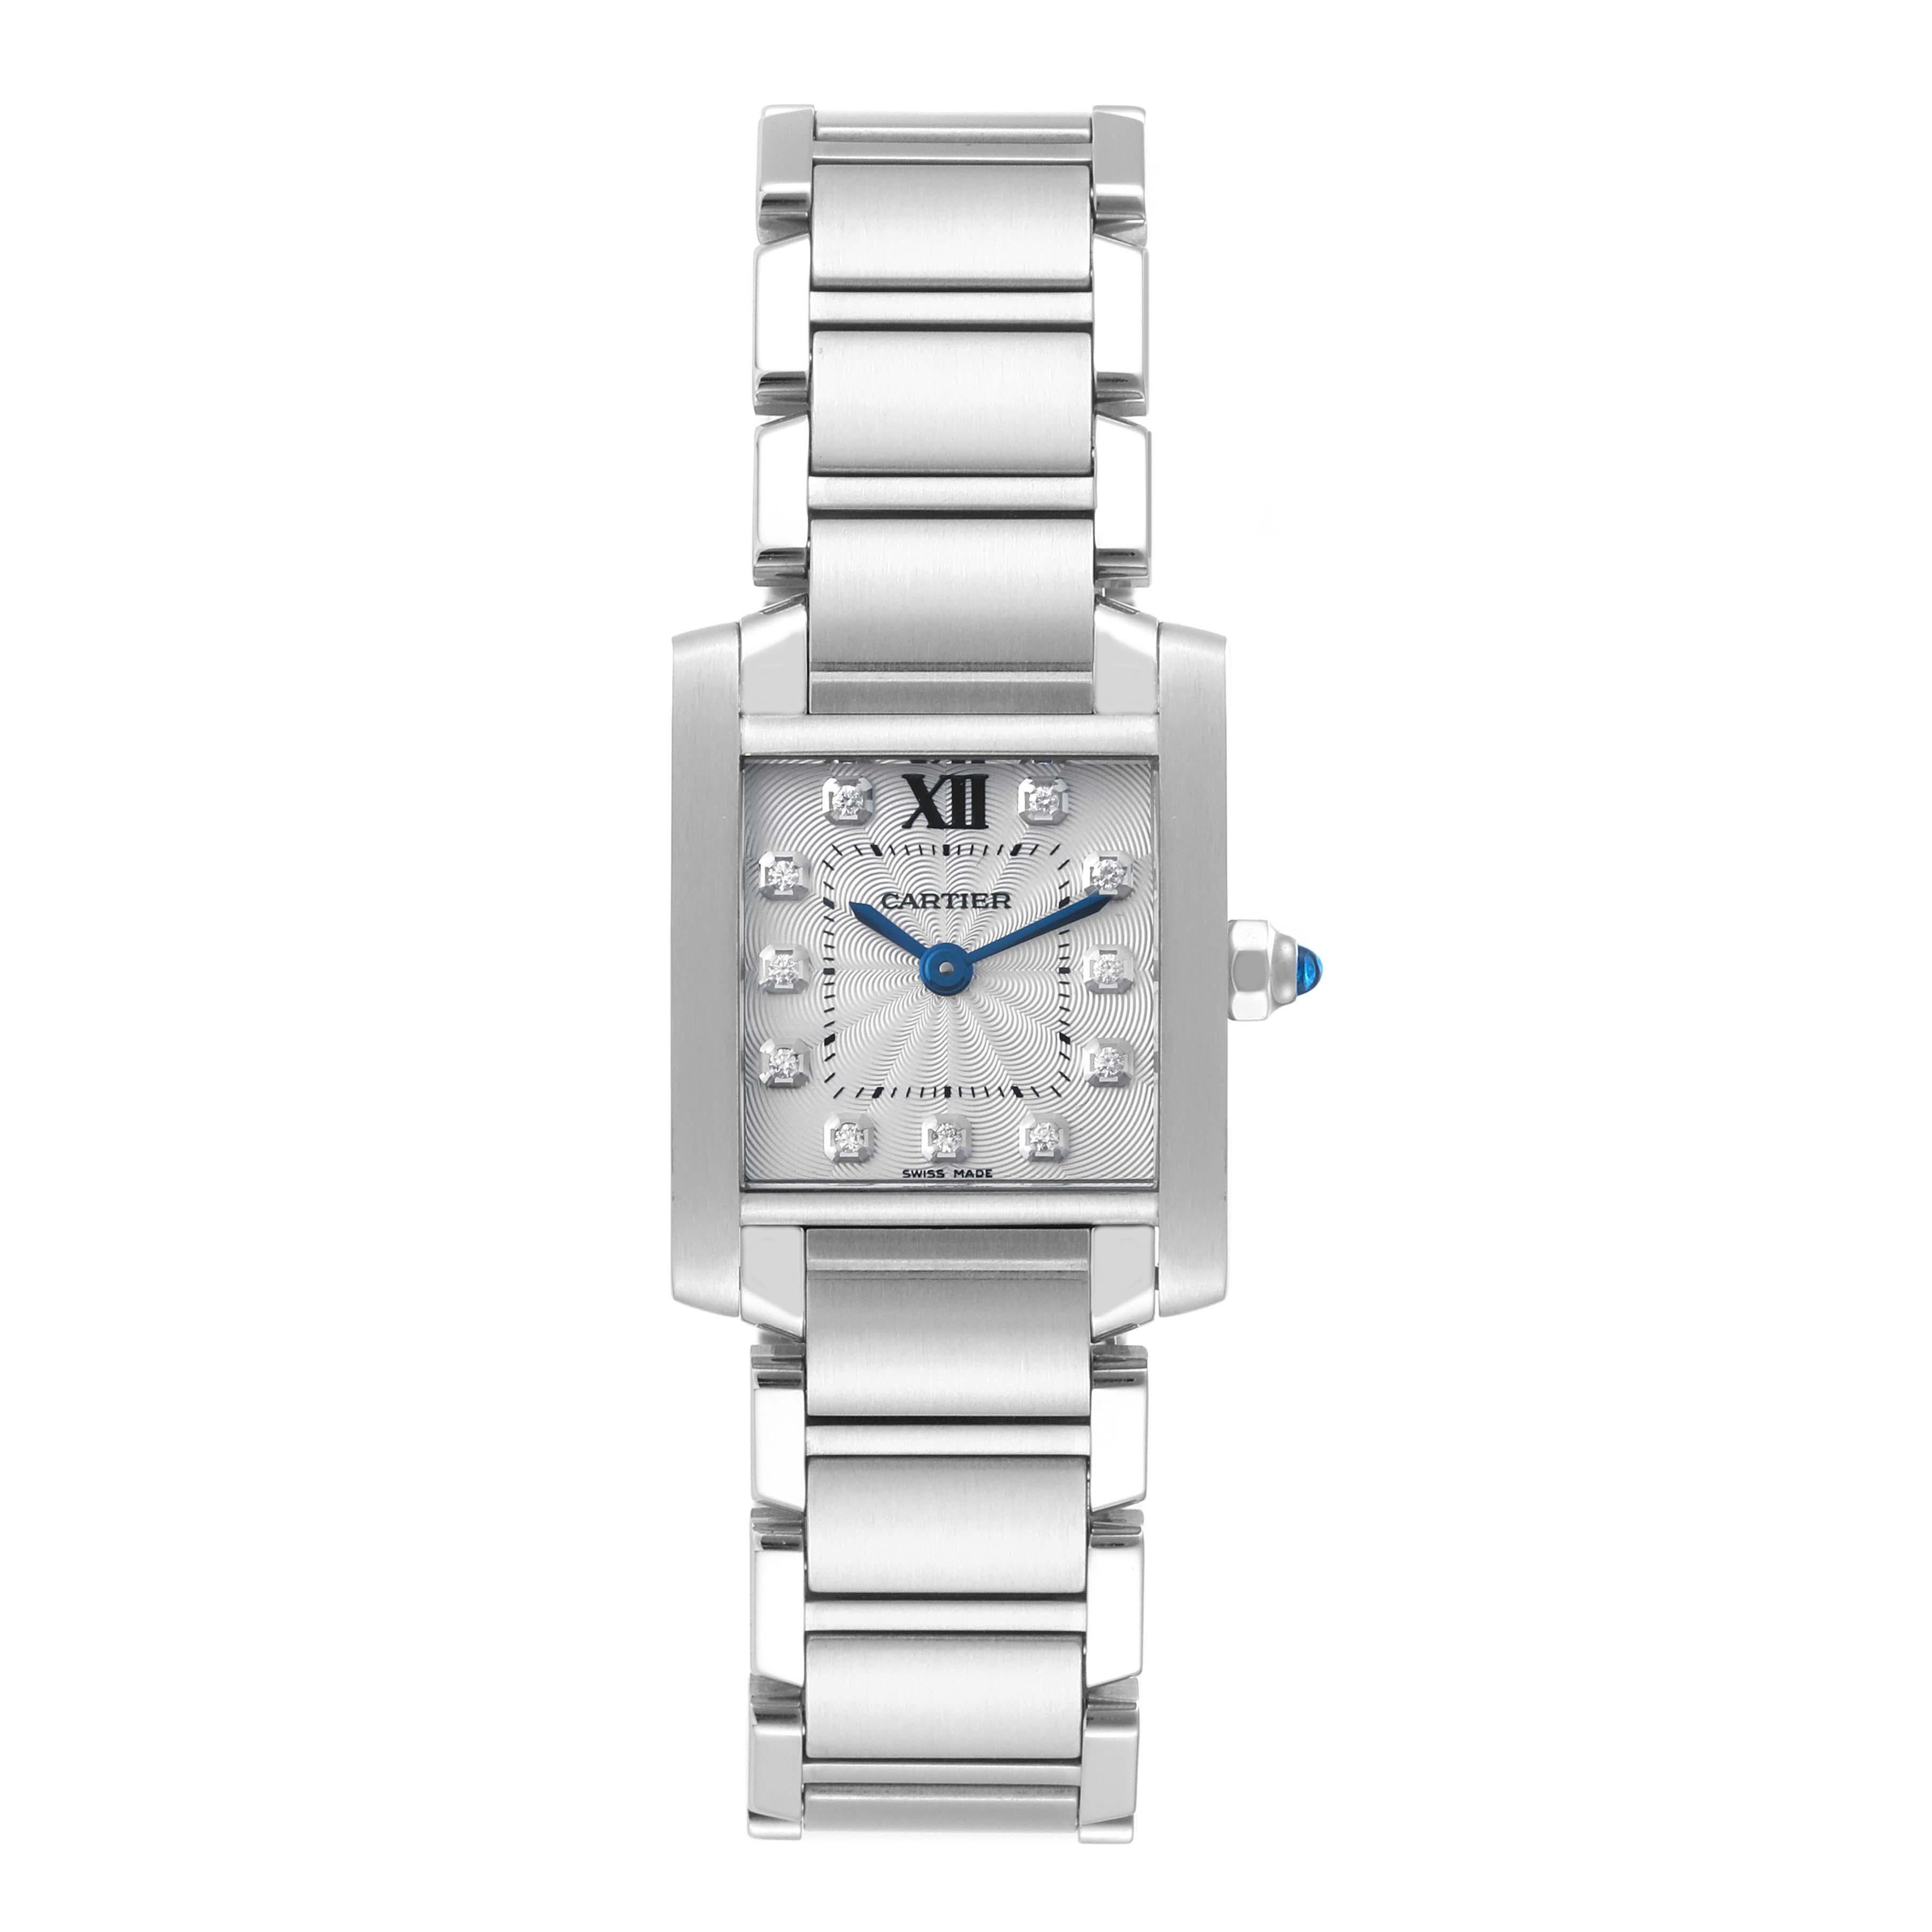 Cartier Tank Francaise Small Steel Diamond Dial Ladies Watch WE110006. Quartz movement. Rectangular stainless steel 20 x 25 mm case. Octagonal crown set with a blue spinel cabochon. . Scratch resistant sapphire crystal. Silver guilloche dial with